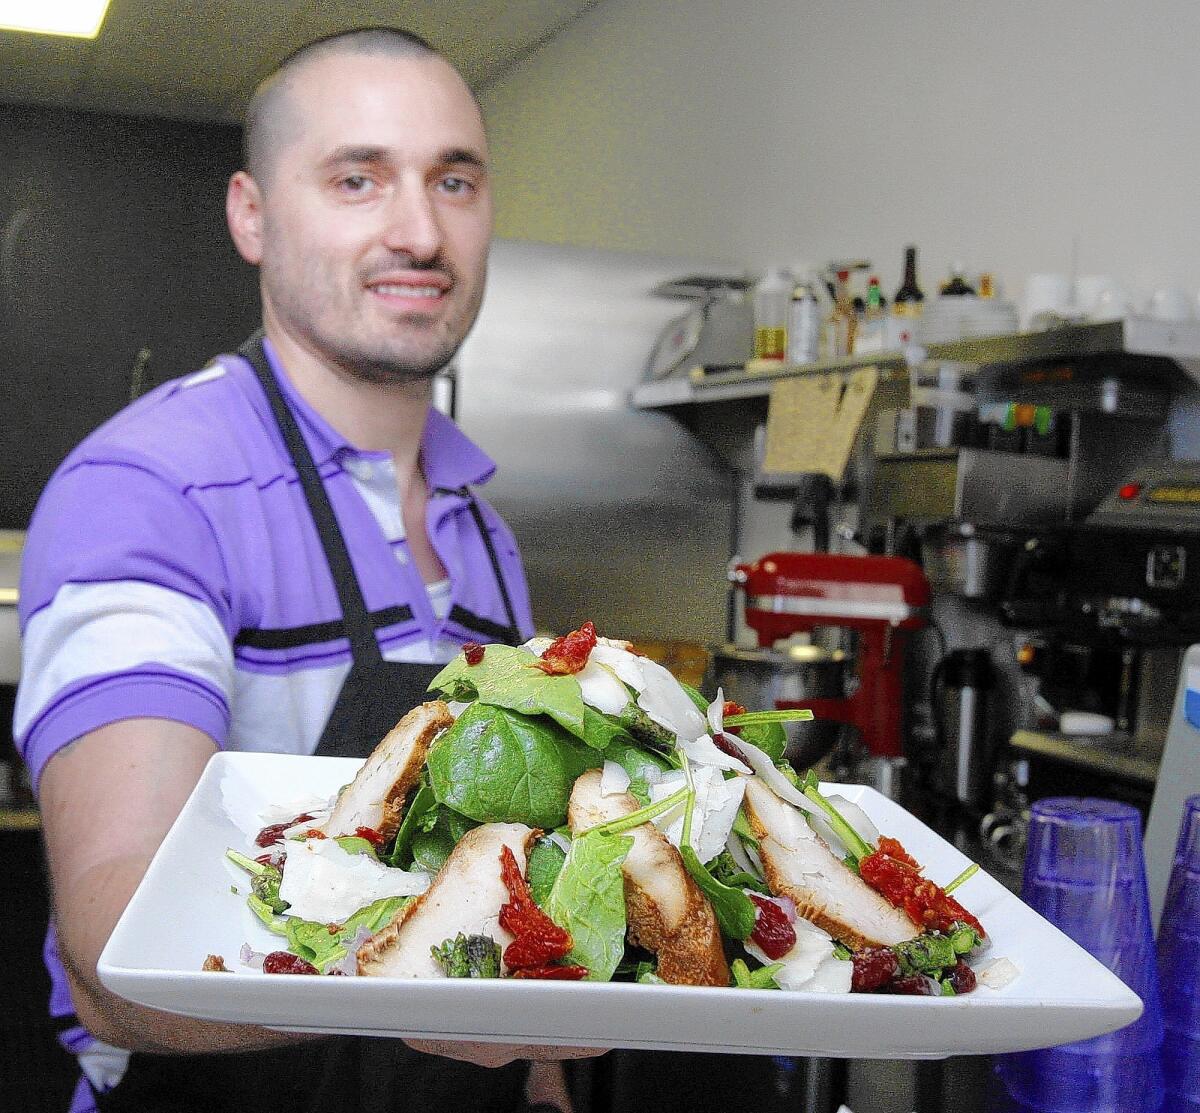 Chef Aurelien (Tony) Mosconi holds a La Chicken Manchego Salad with spinach, grilled chicken, imported Manchego cheese, red onions, cranberries, sundried tomatoes, asparagus, homemade raspberry vinaigrette at Monsieur Crêpe in Sierra Madre on Friday, March 7, 2014.